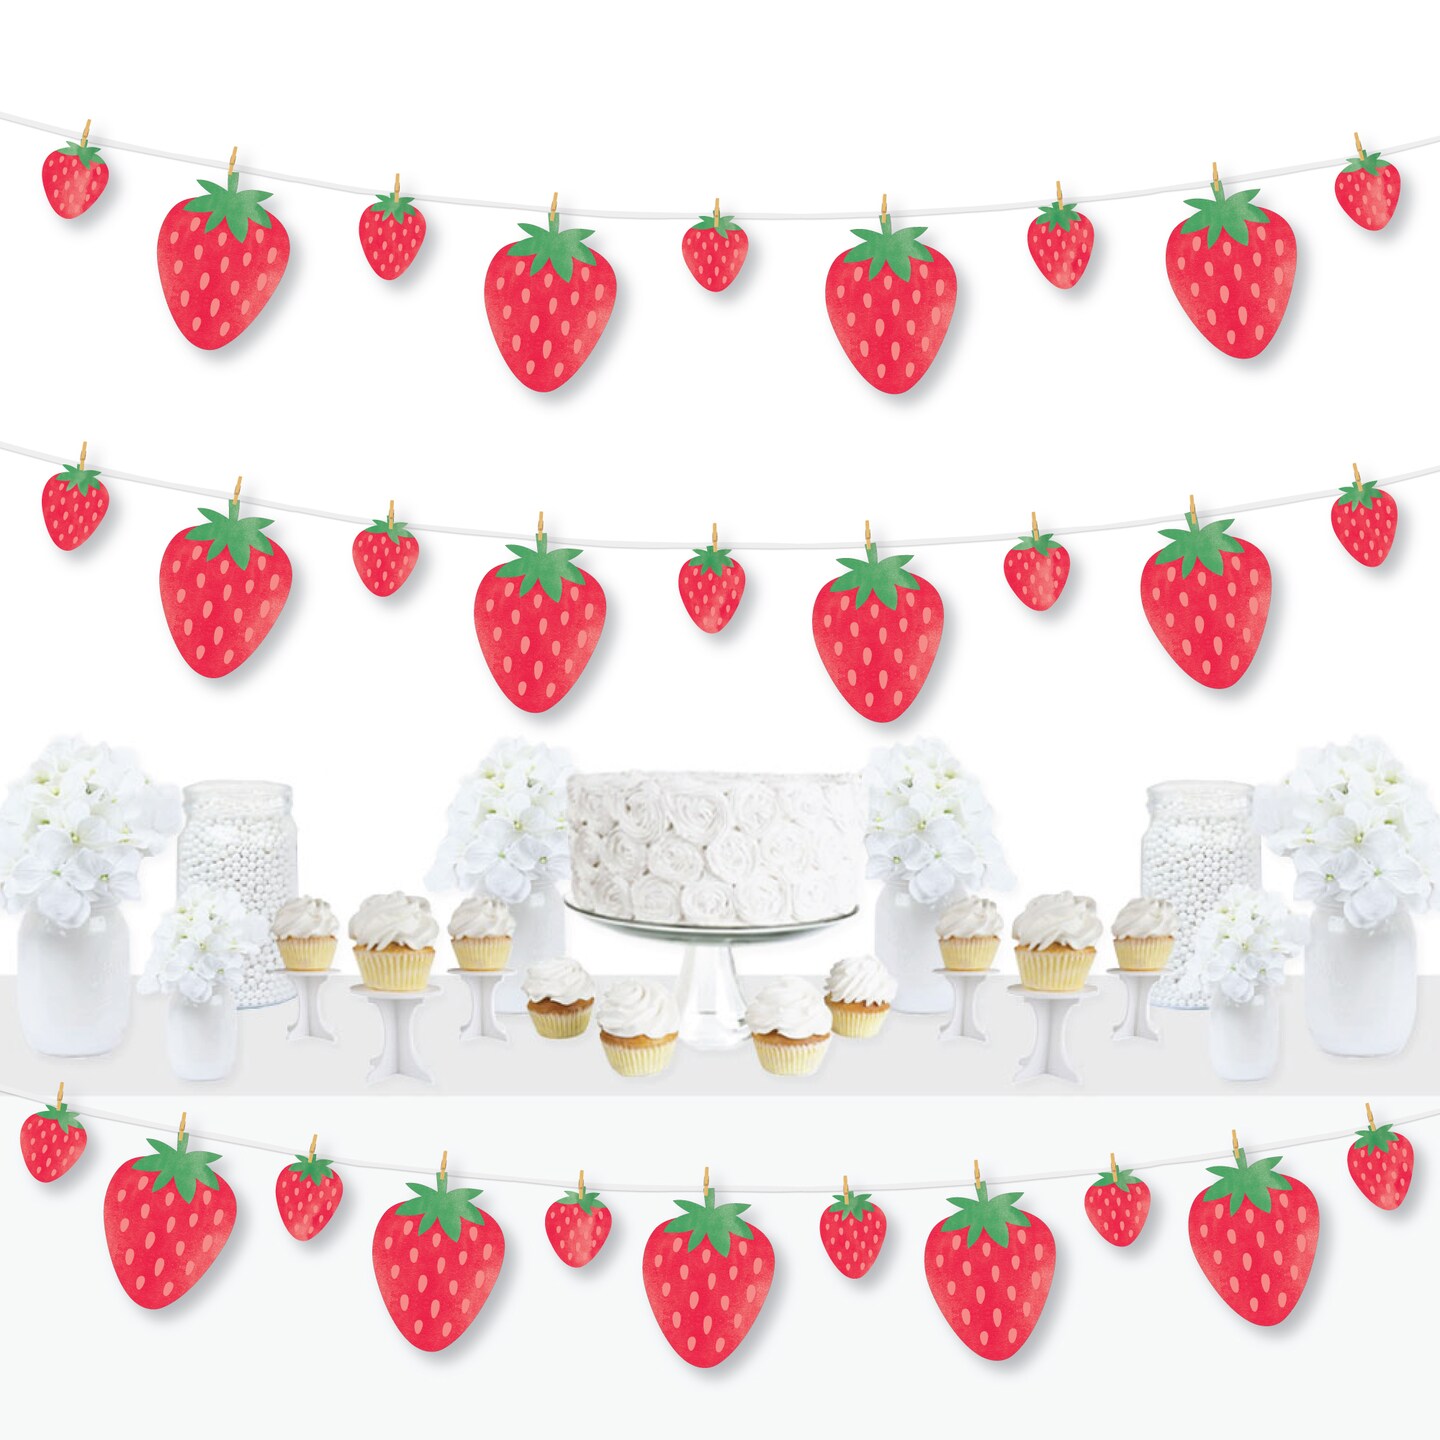 Big Dot of Happiness Berry Sweet Strawberry - Fruit Themed Birthday Party or Baby Shower DIY Decorations - Clothespin Garland Banner - 44 Pieces